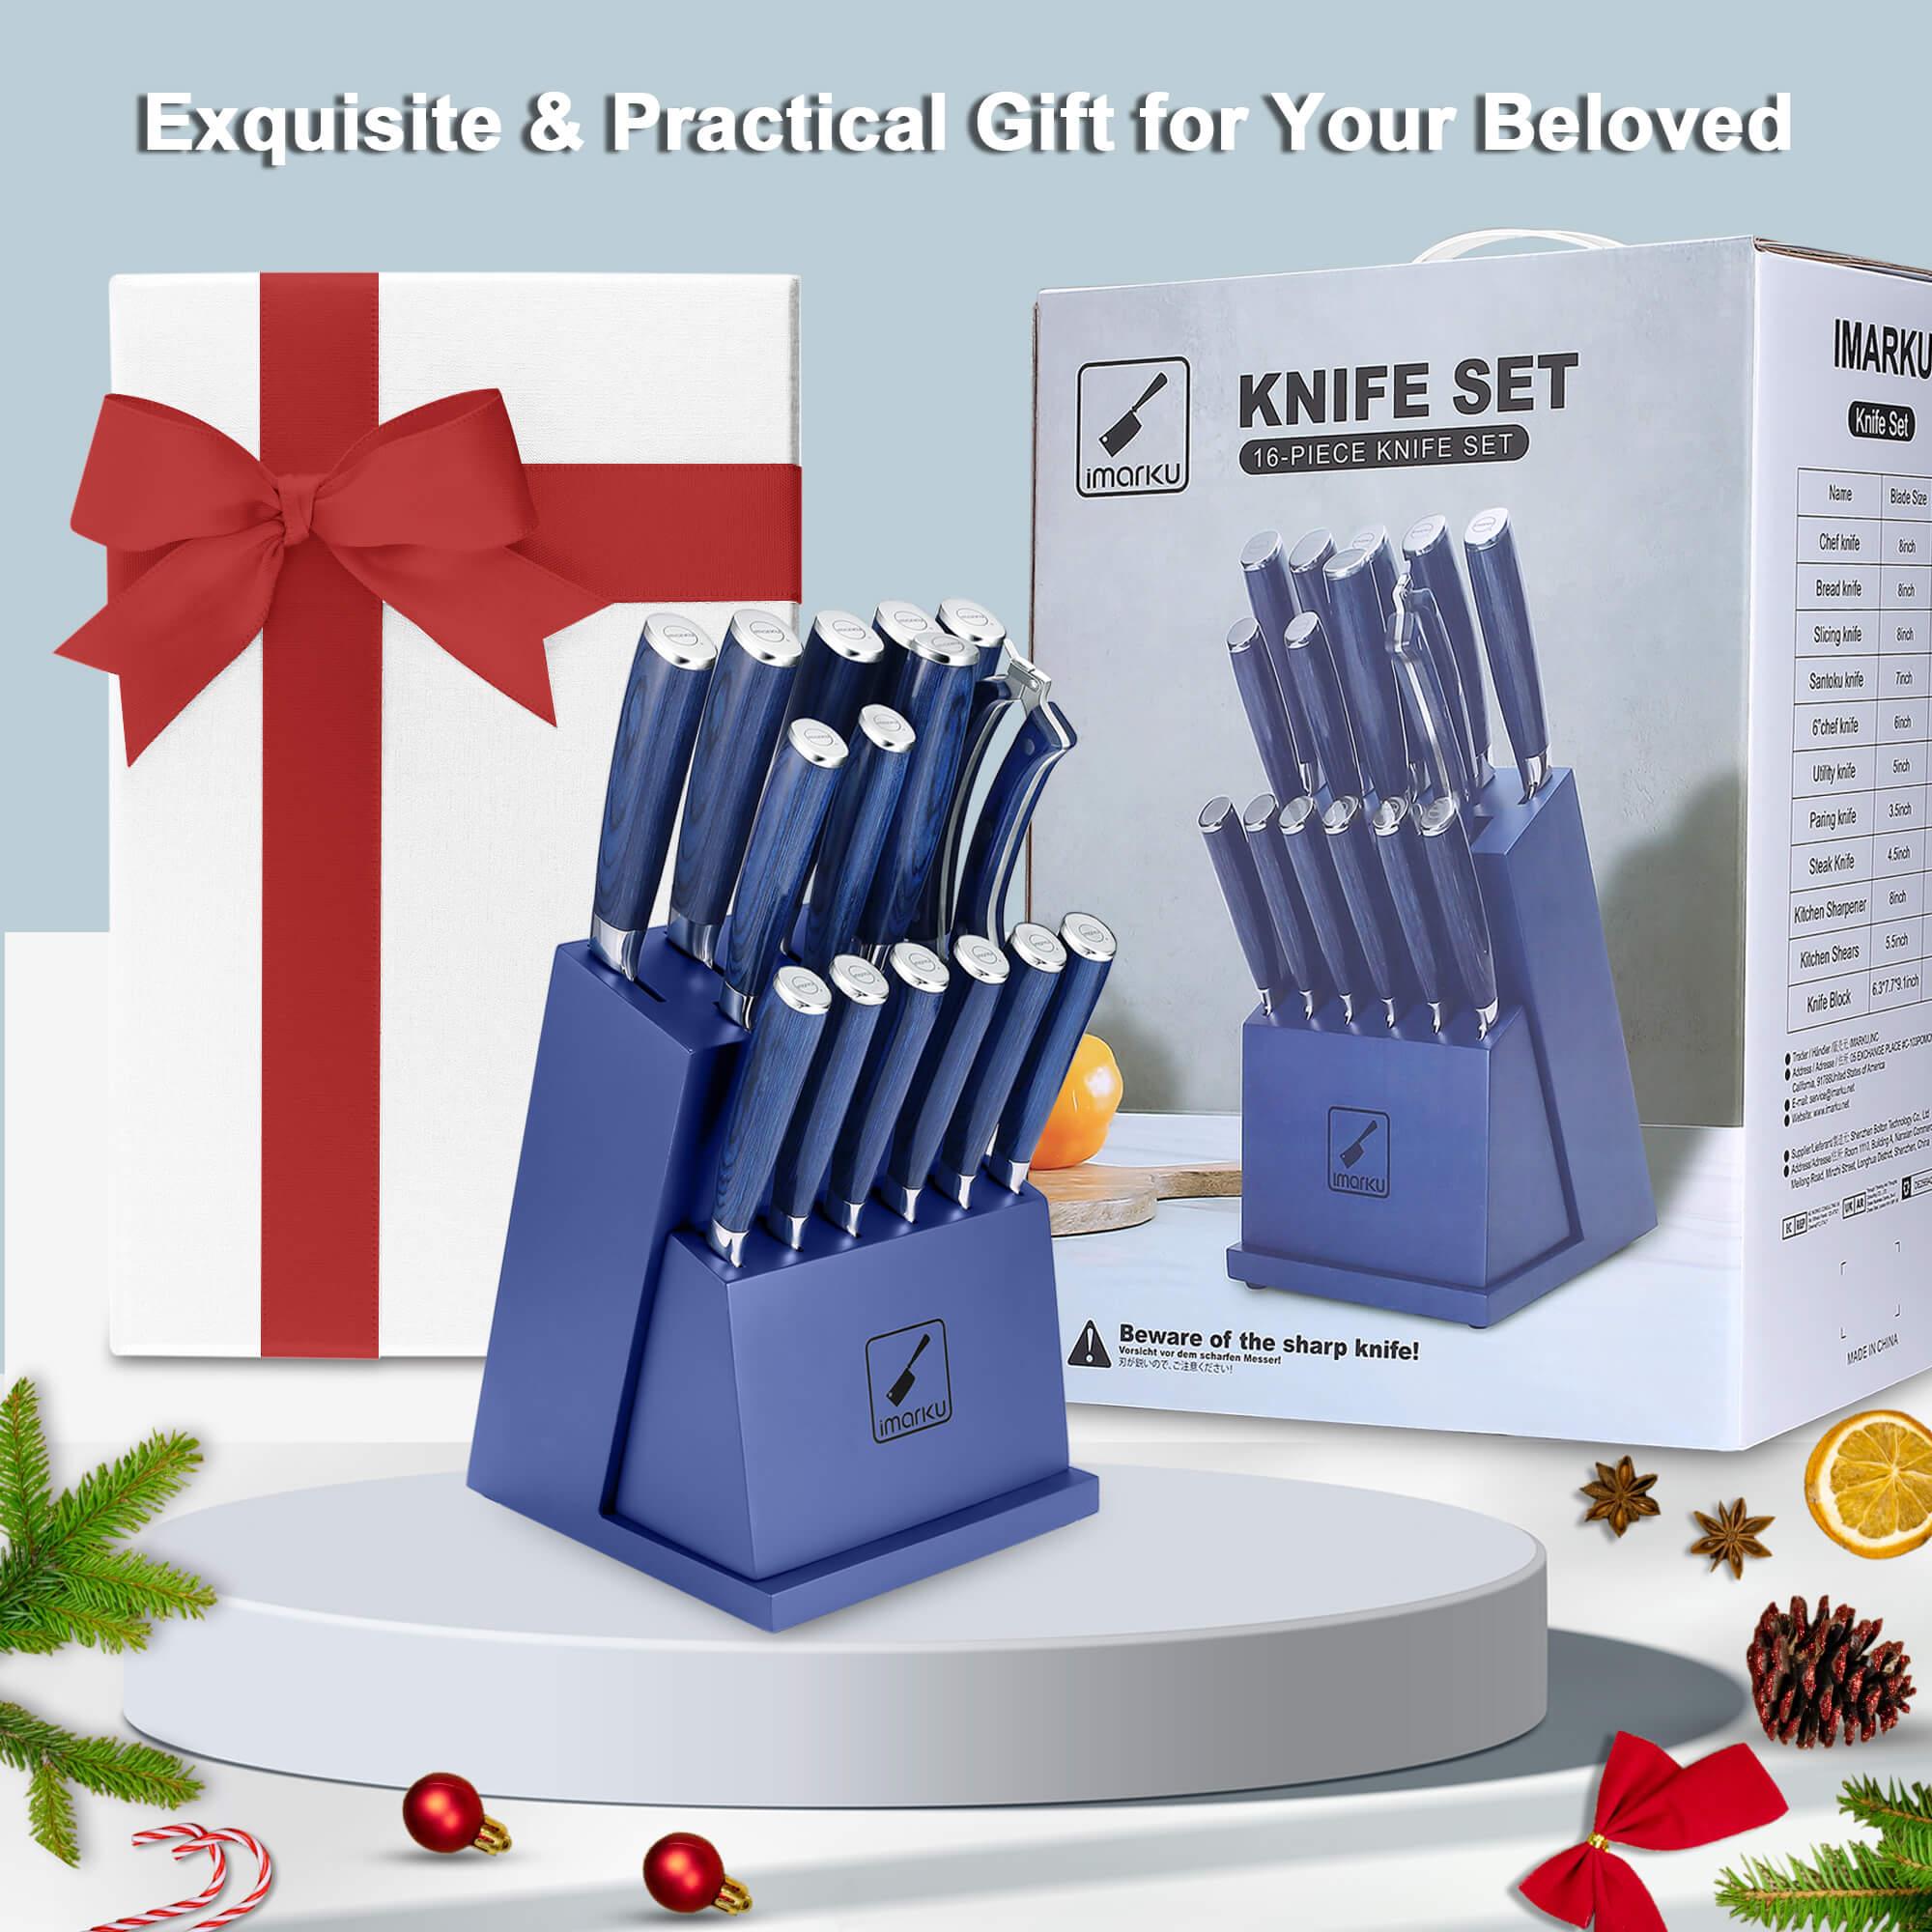 Best 16-Piece Japanese Knife Set with Removable Block, Classic Design -  IMARKU